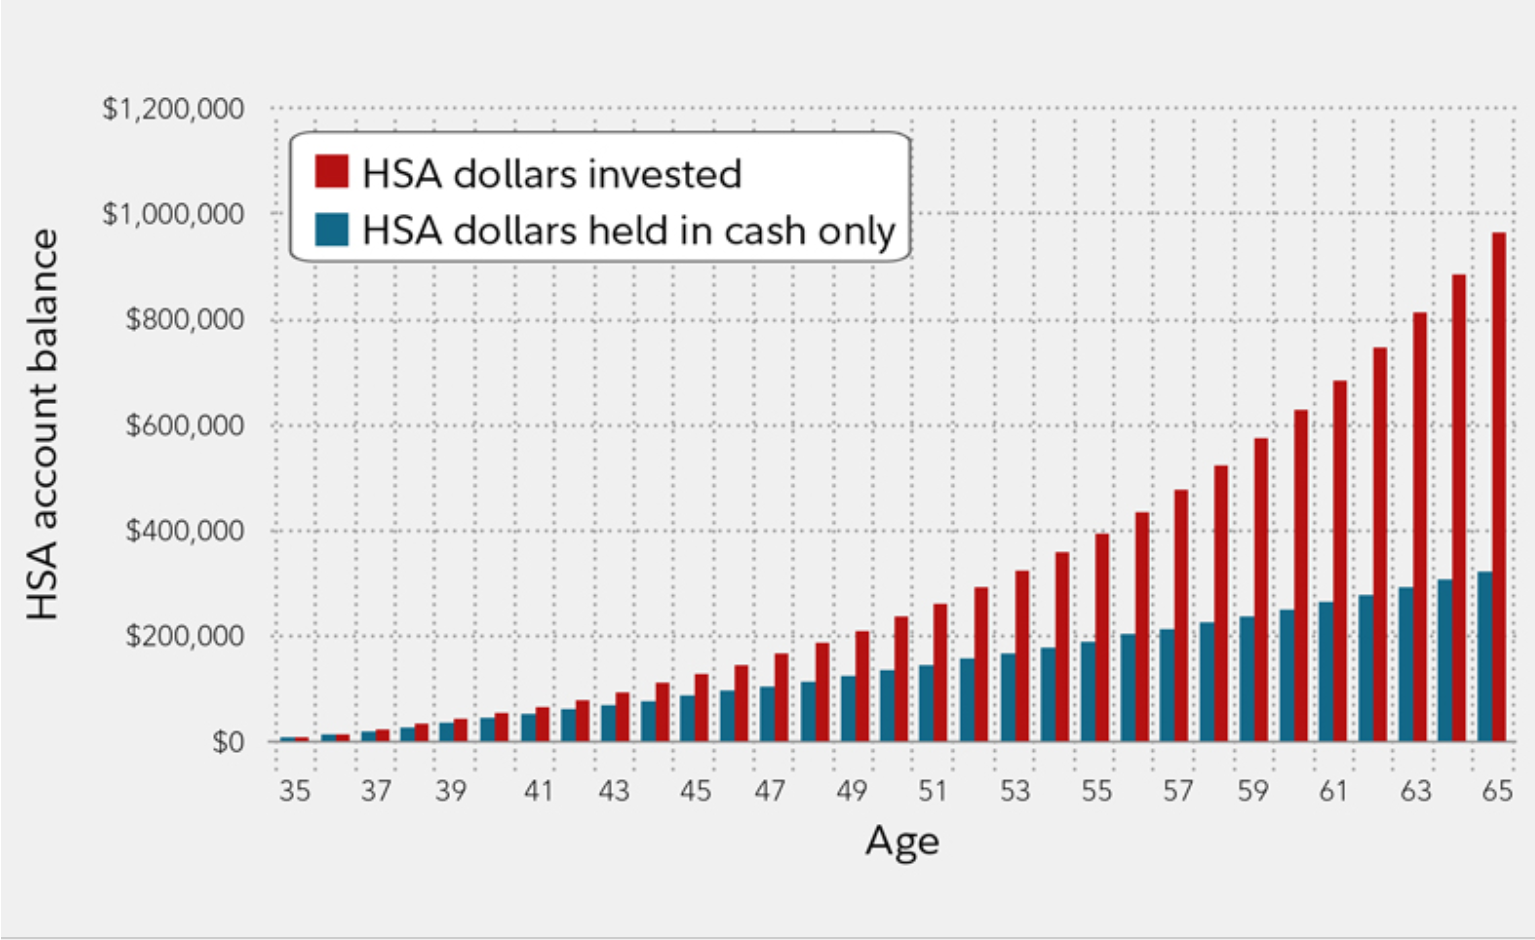 A bar graph of HSA hypothetical balances (investment versus cash) over a 30 year period from age 35 to 65.